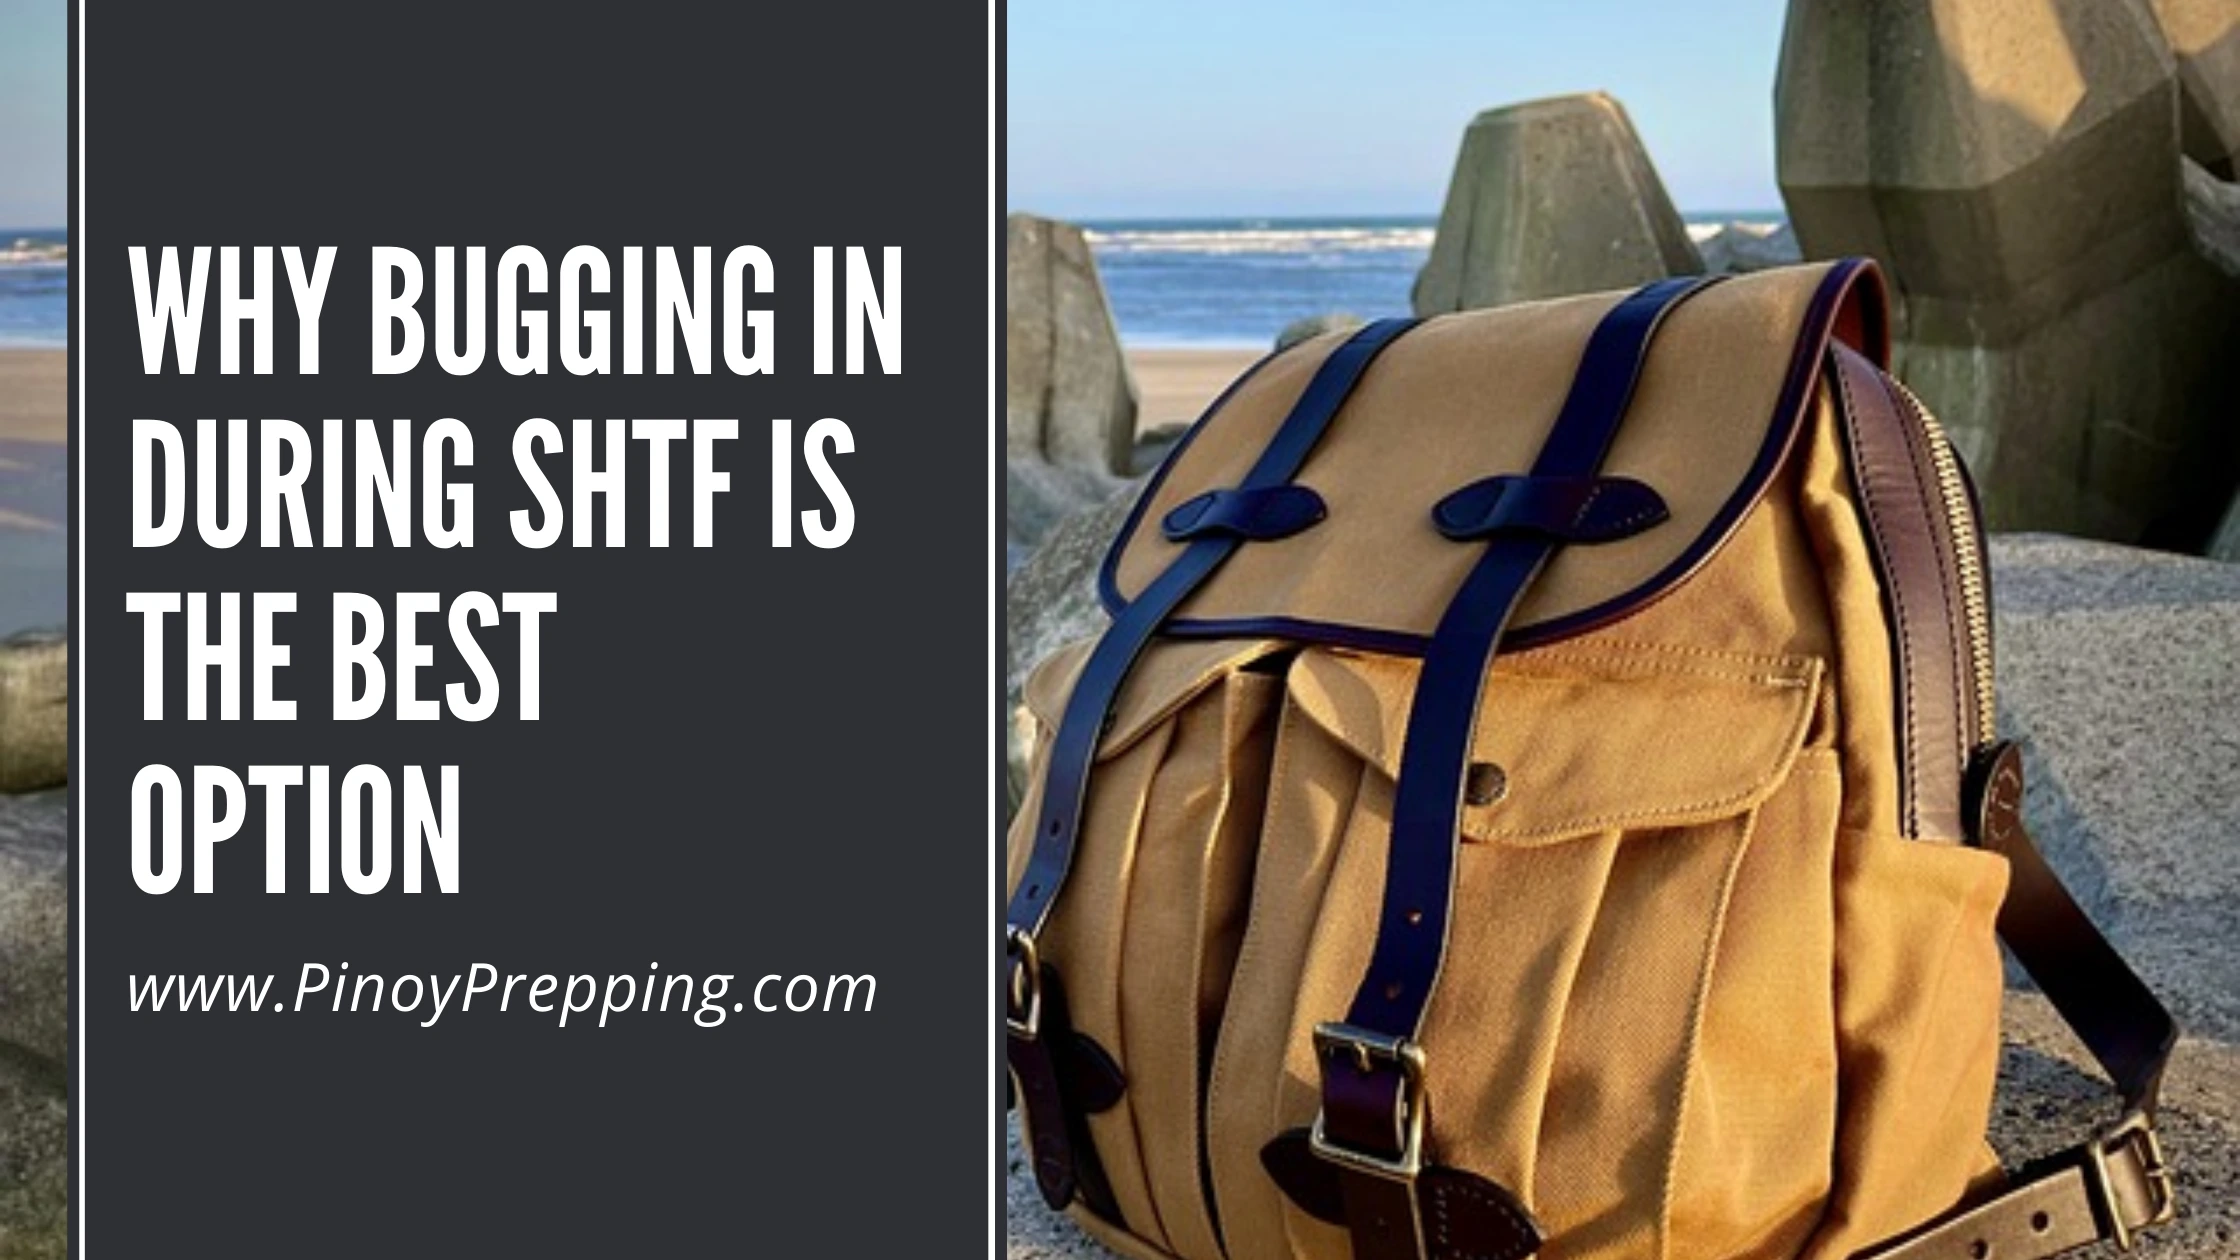 Why Bugging In During SHTF Is the Key to Long-Term Survival?